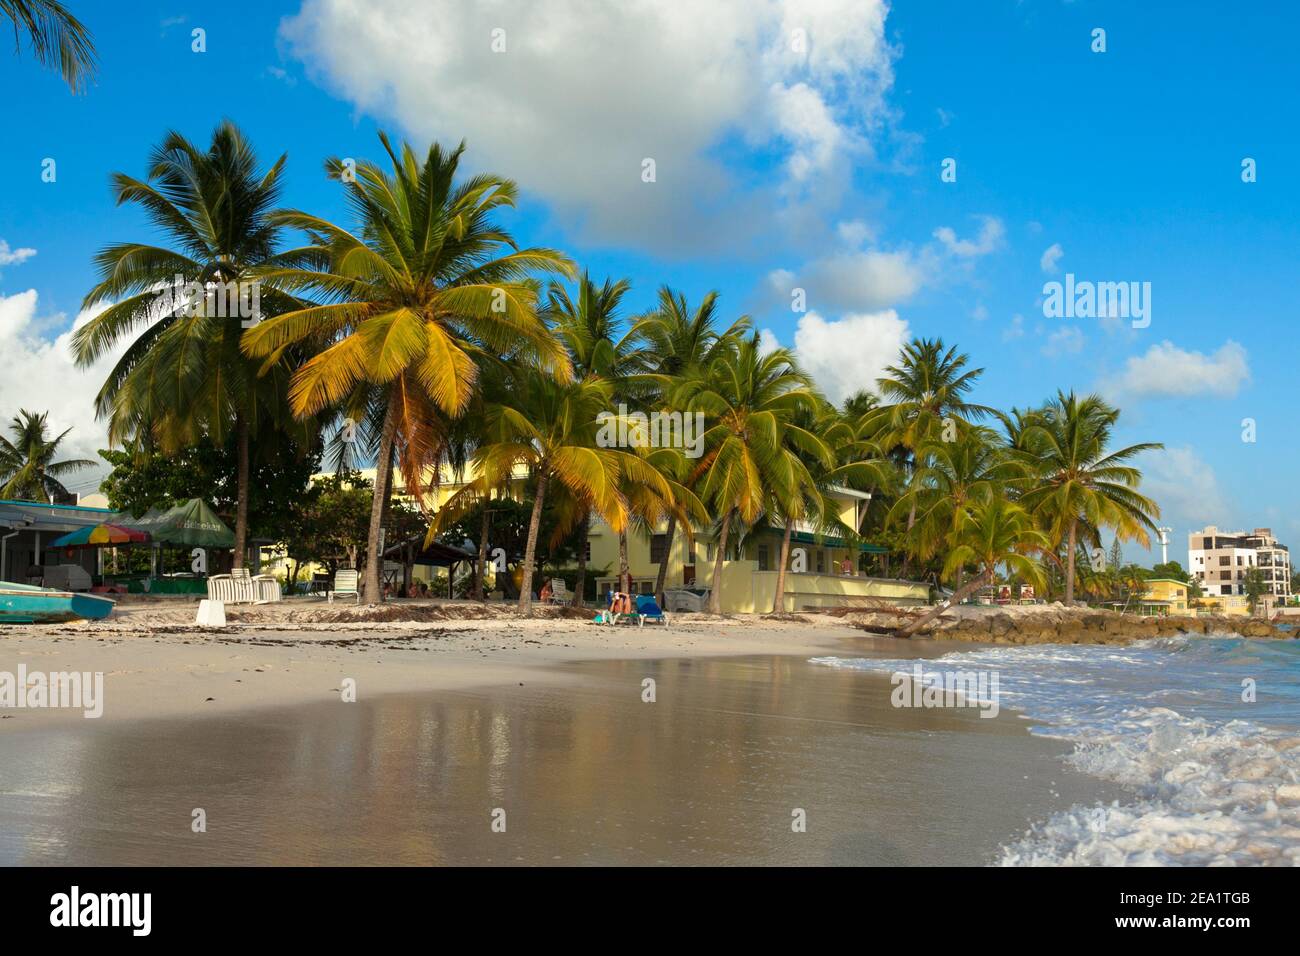 SOUTH COAST, BARBADOS – MARCH 04, 2011: Worthing beach. Beach with palm trees on ocean Stock Photo